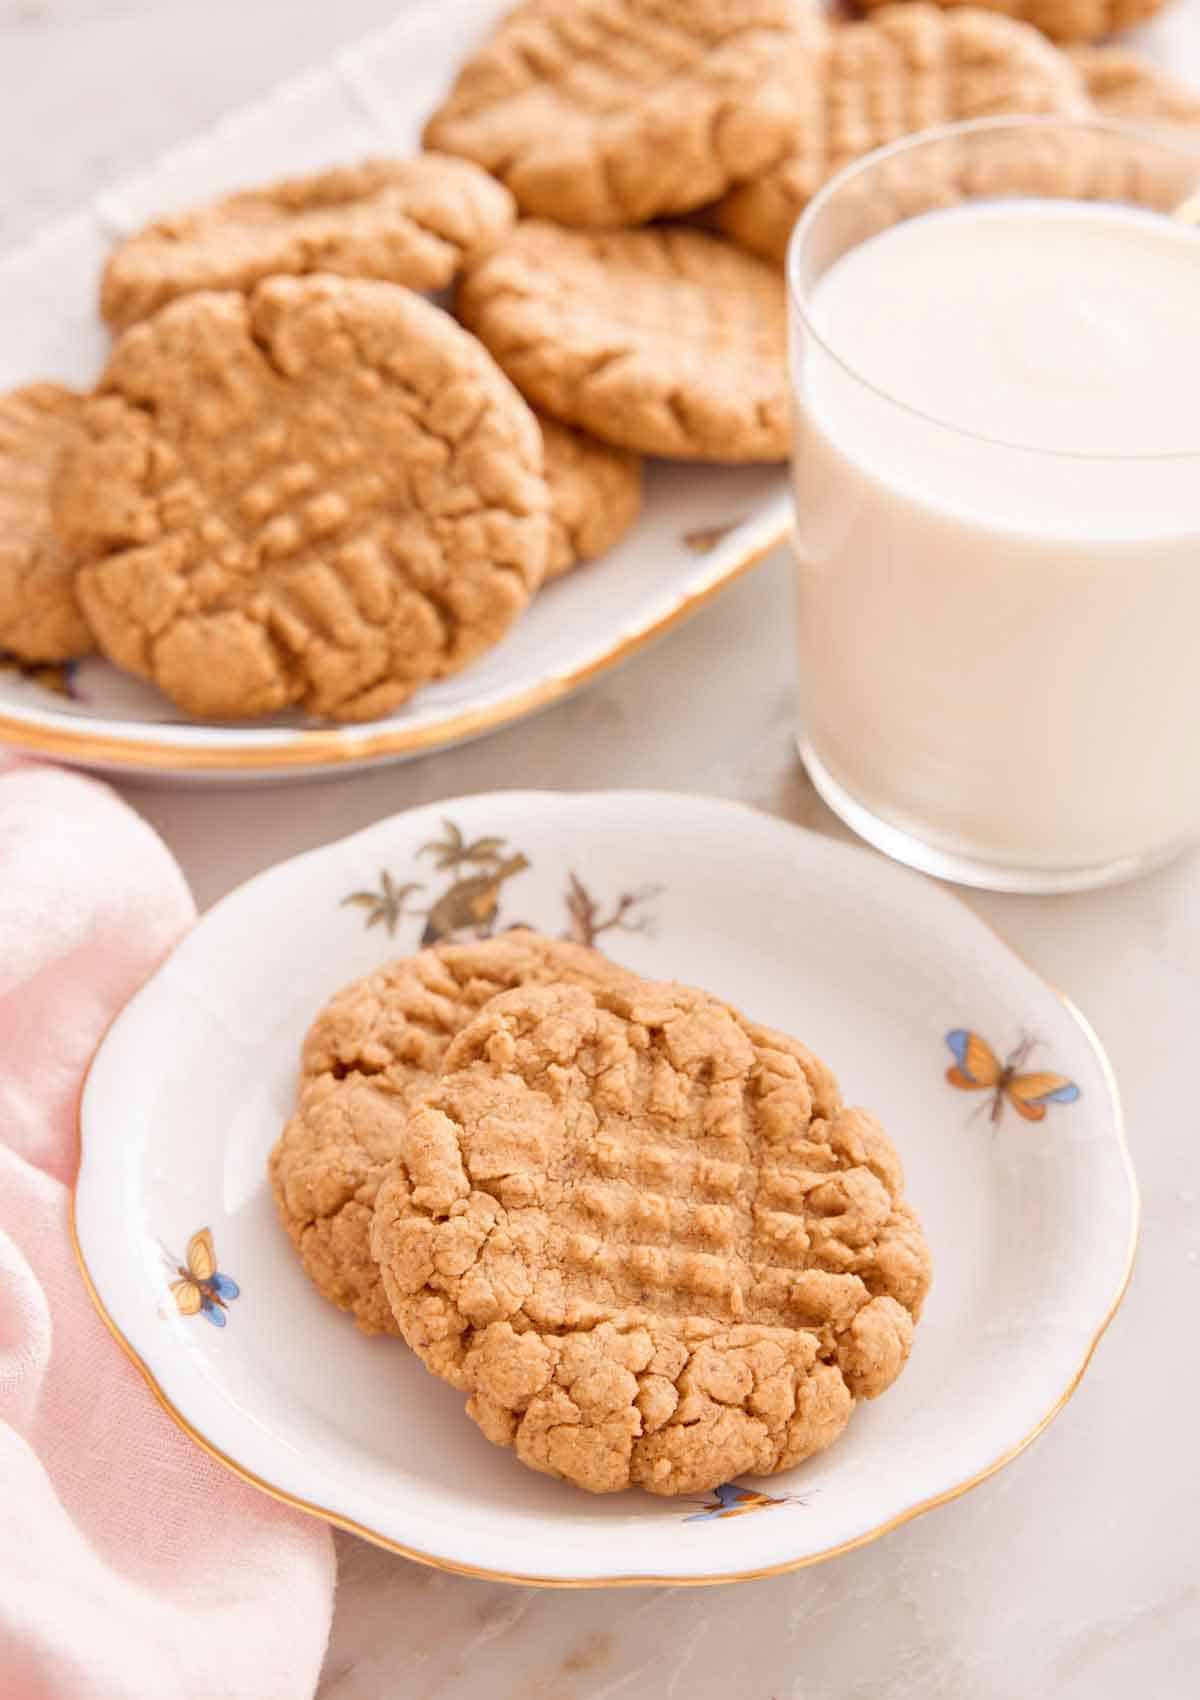 A plate with two almond butter cookies with a platter of more cookies and glass of milk behind it.